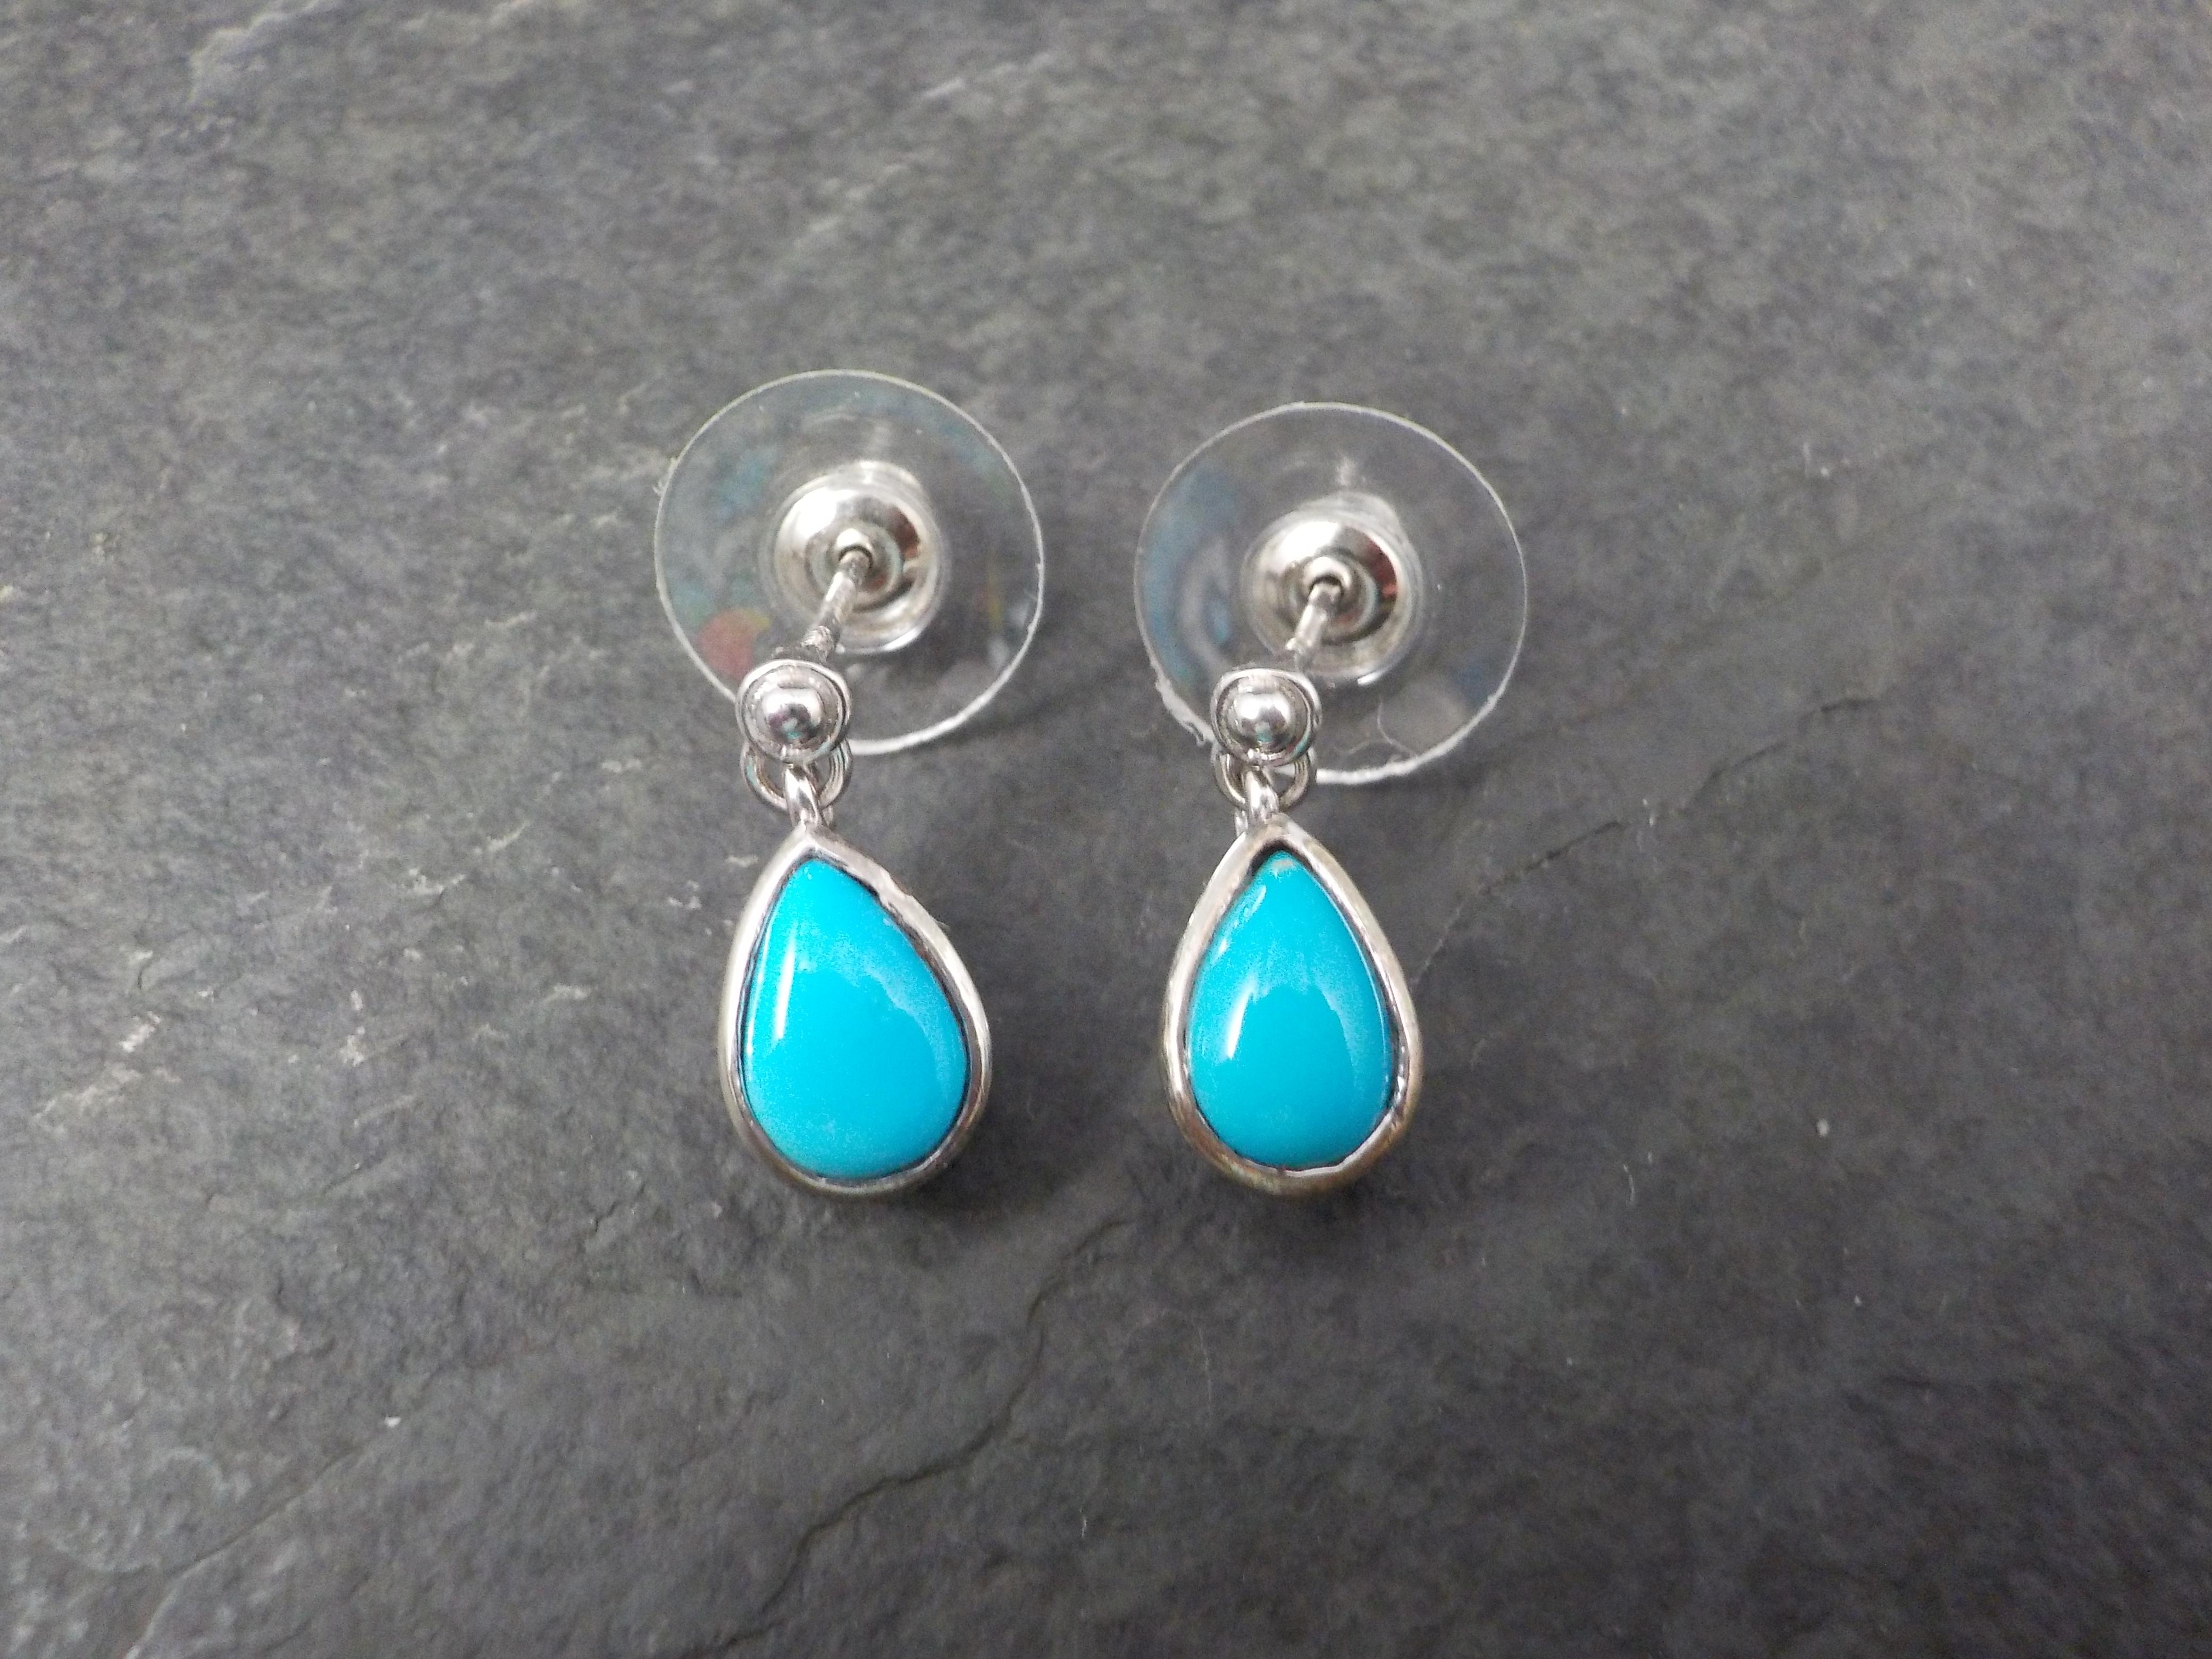 These beautiful earrings are sterling silver with genuine 6x9mm turquoise gemstones.
Measurements: 1/4 by 11/16 of an inch
Weight: 1.8 grams
Marks: 925, Chuck Clemency's STS hallmark
Condition: New old stock